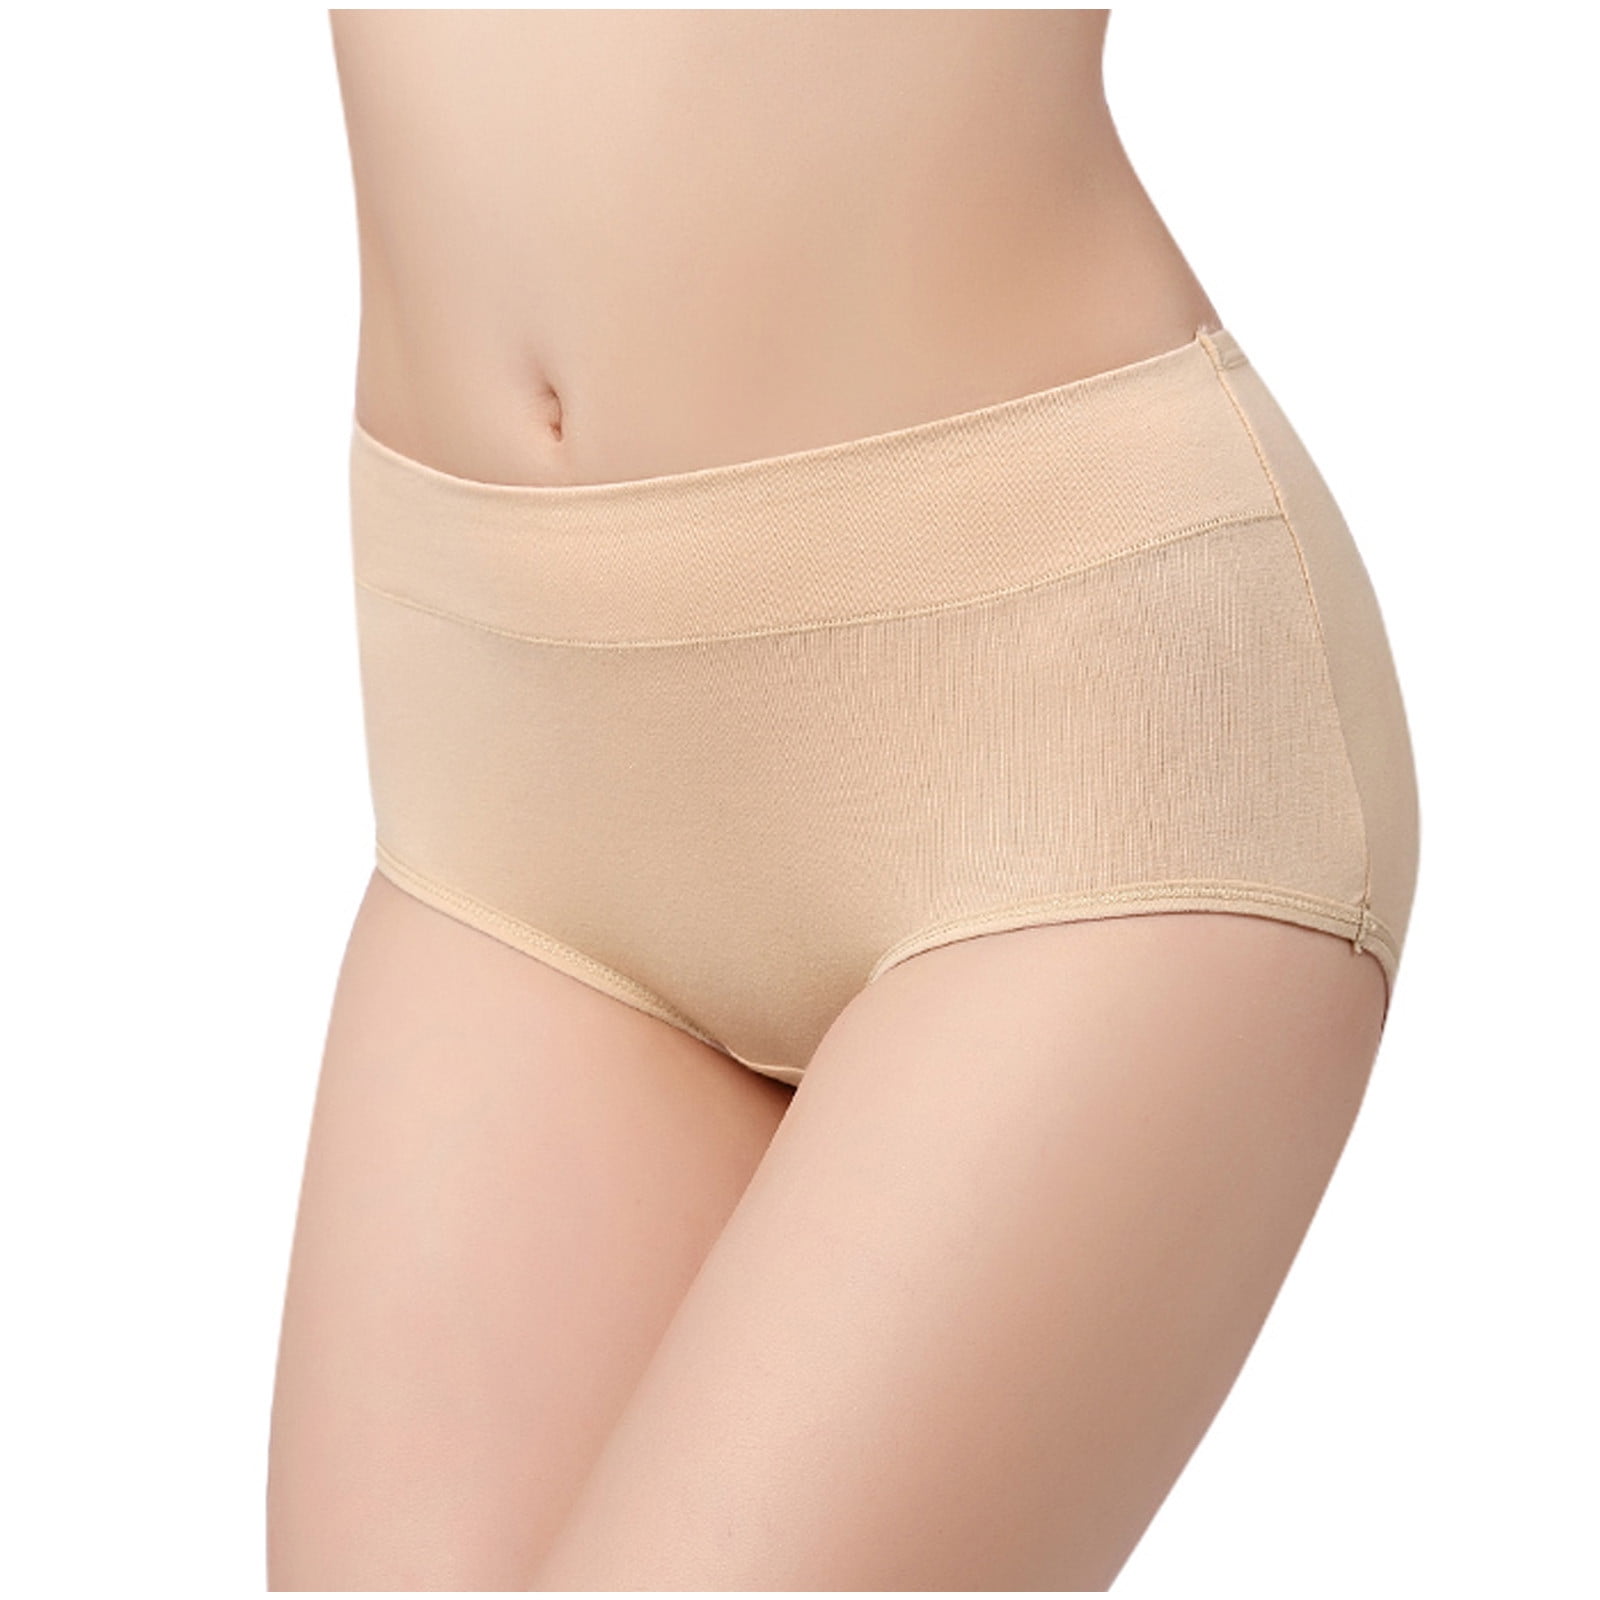 Women's Cotton Stretch Underwear Comfy Low Waist Sheer Lace Briefs Ladies  Breathable Seamless Panties Undergarments